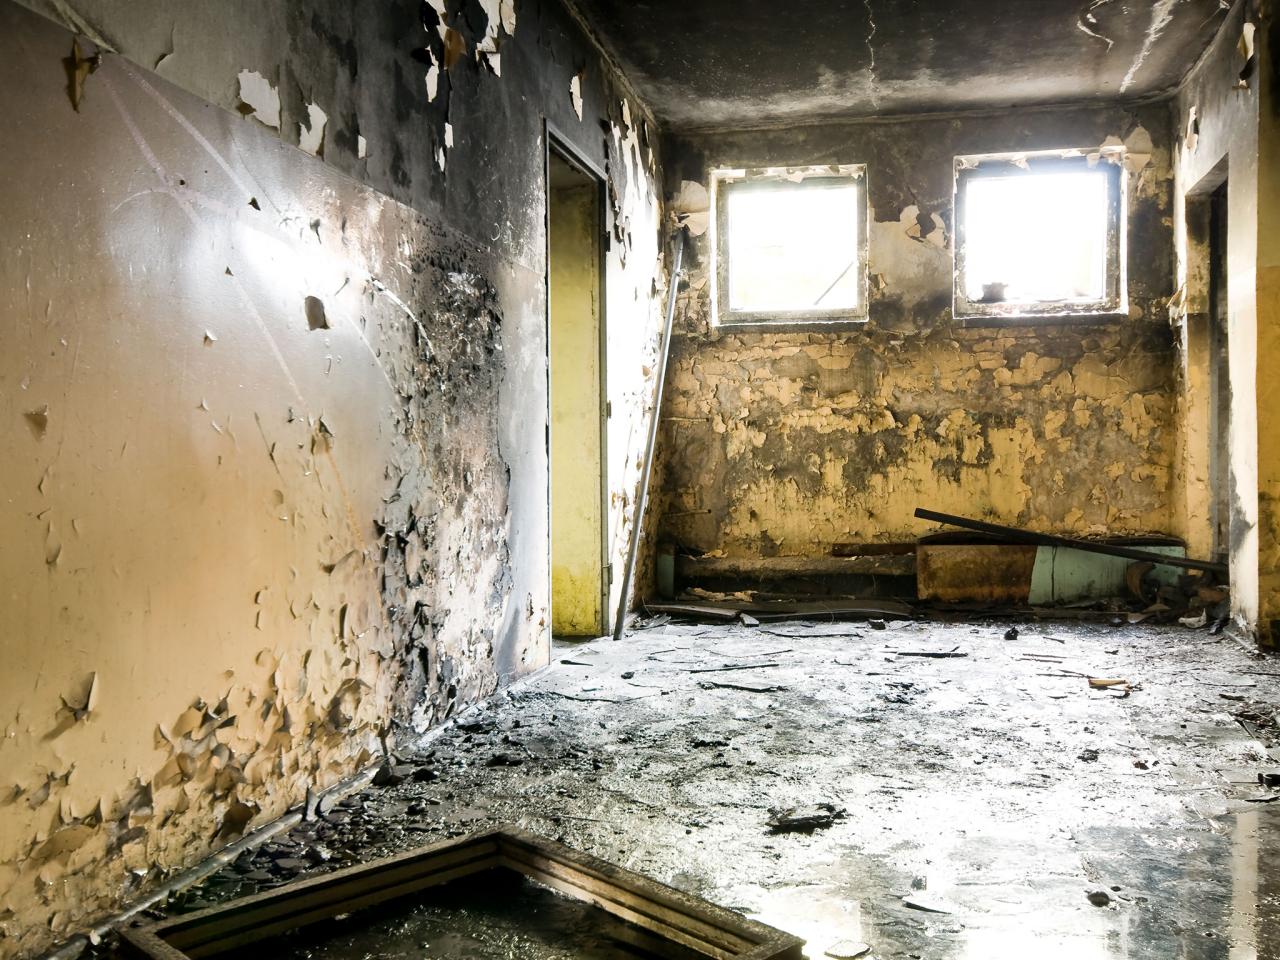 What are the symptoms of exposure to toxic black mold?